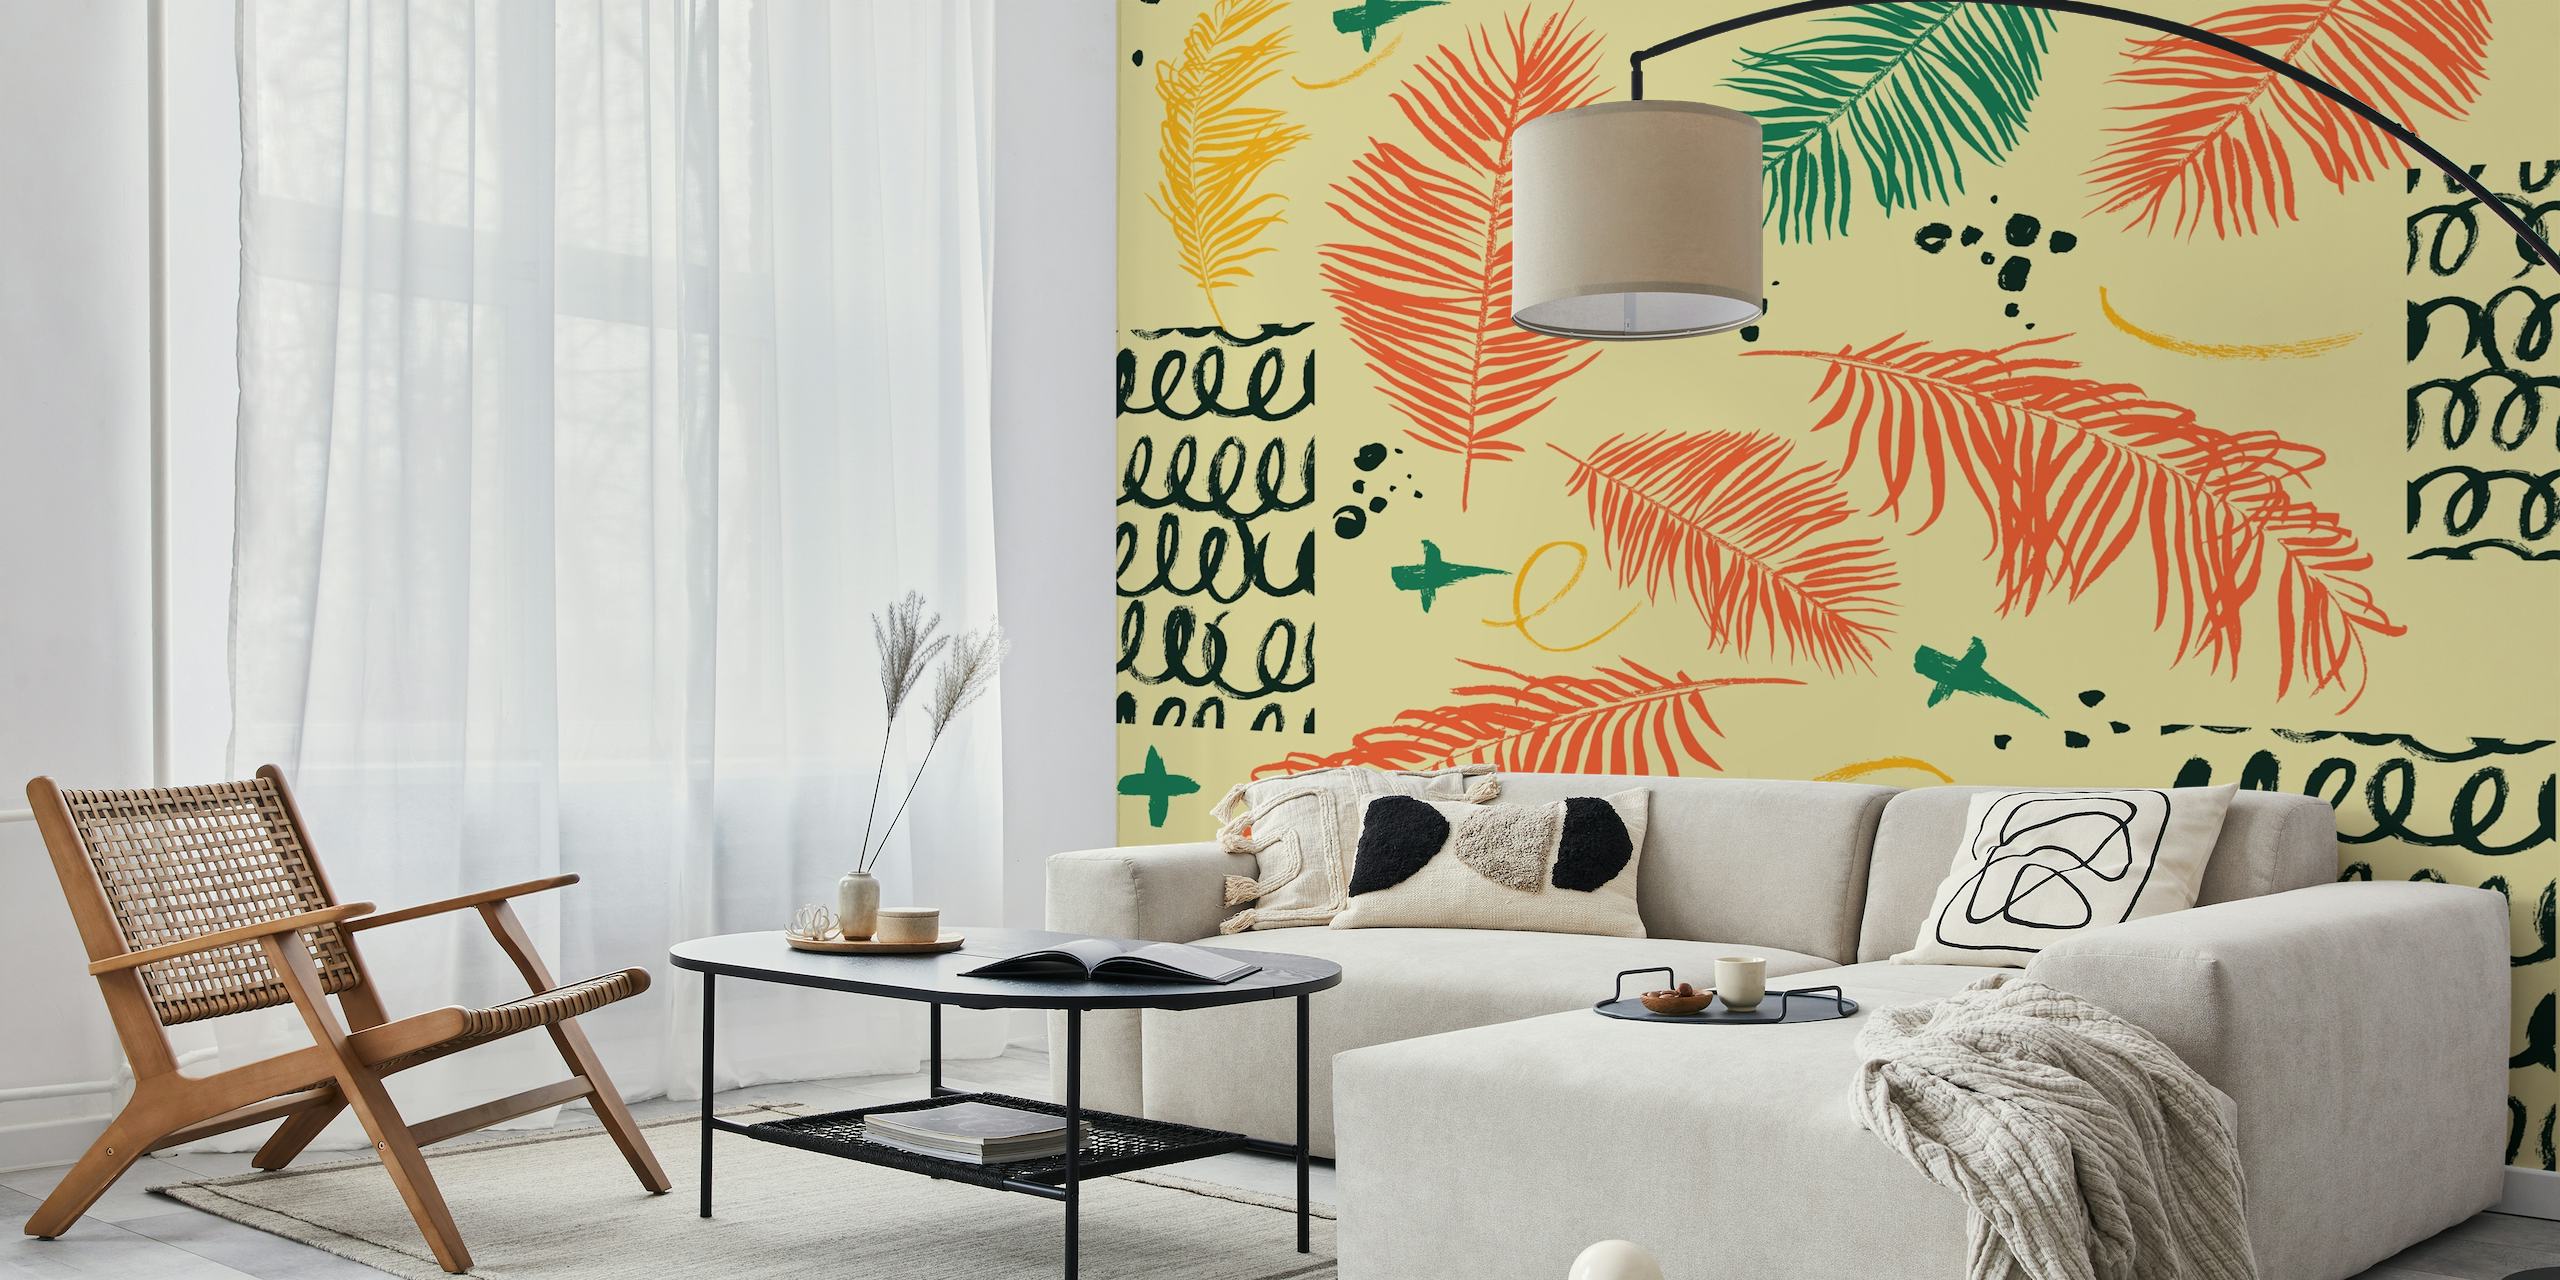 Colorful Leaf Punk wall mural featuring a mix of vibrant tropical leaves and abstract elements in warm and cool tones